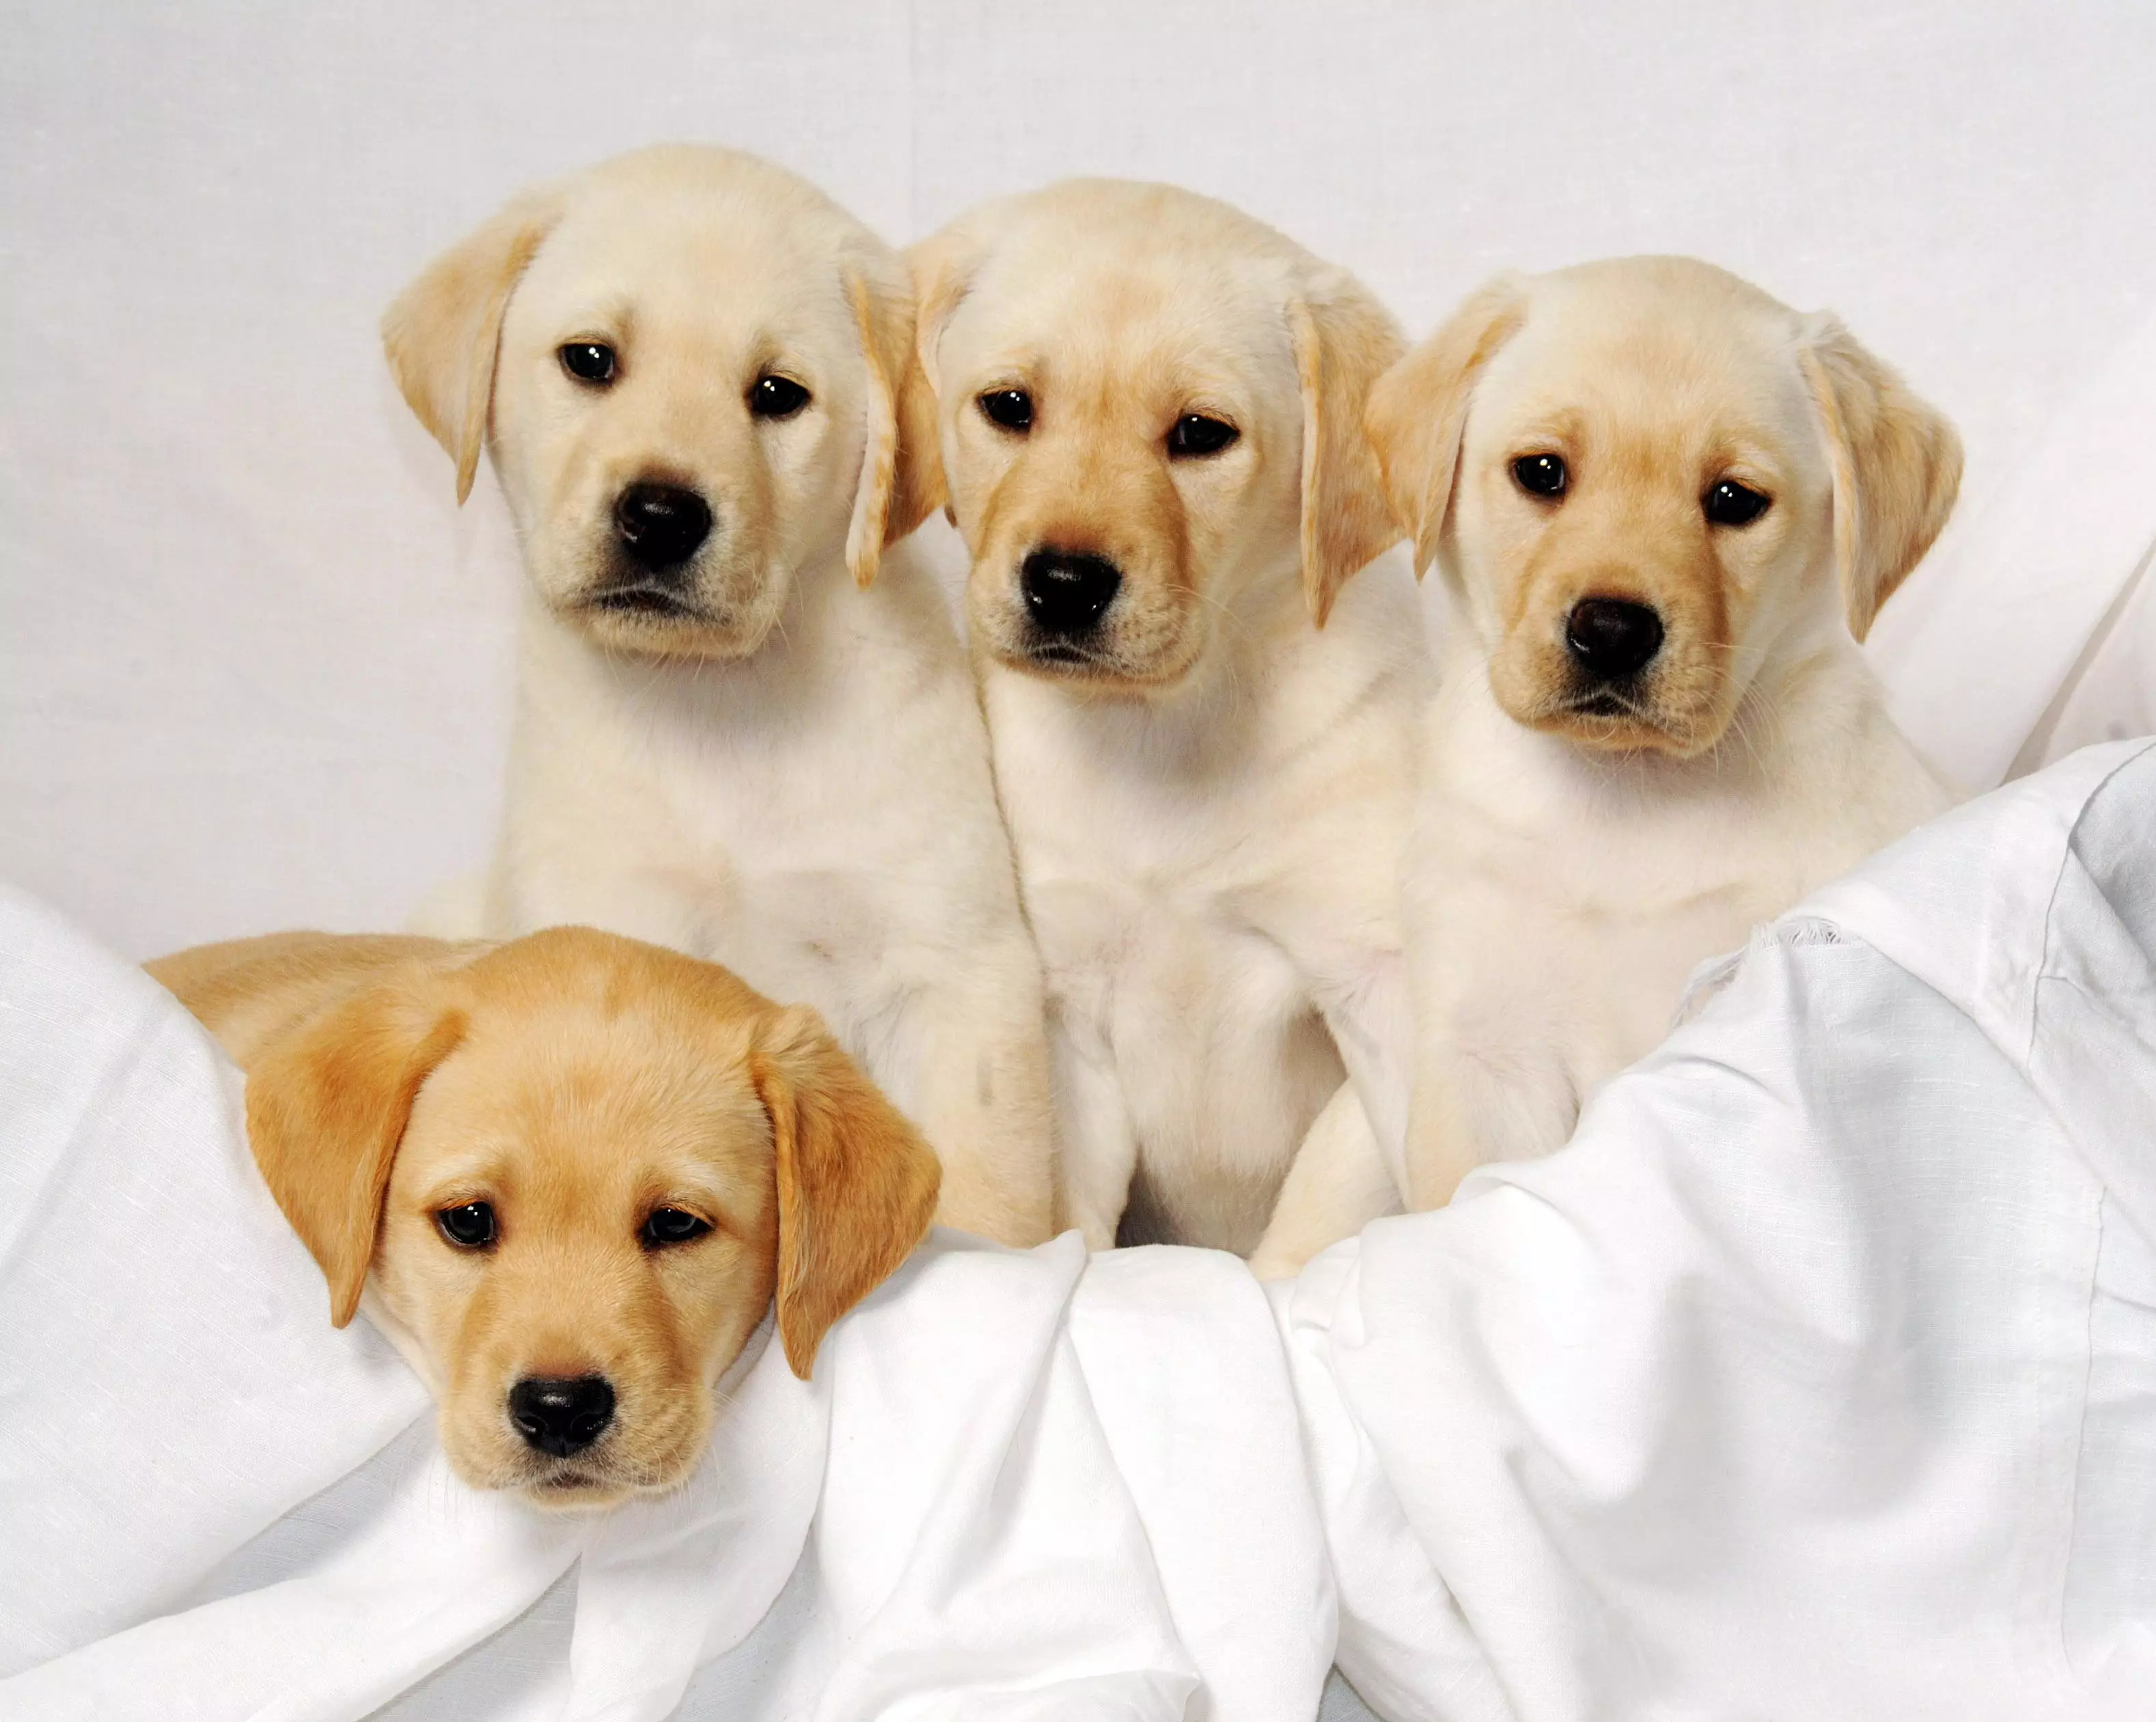 Labradors are one of the most popular dogs in the UK.